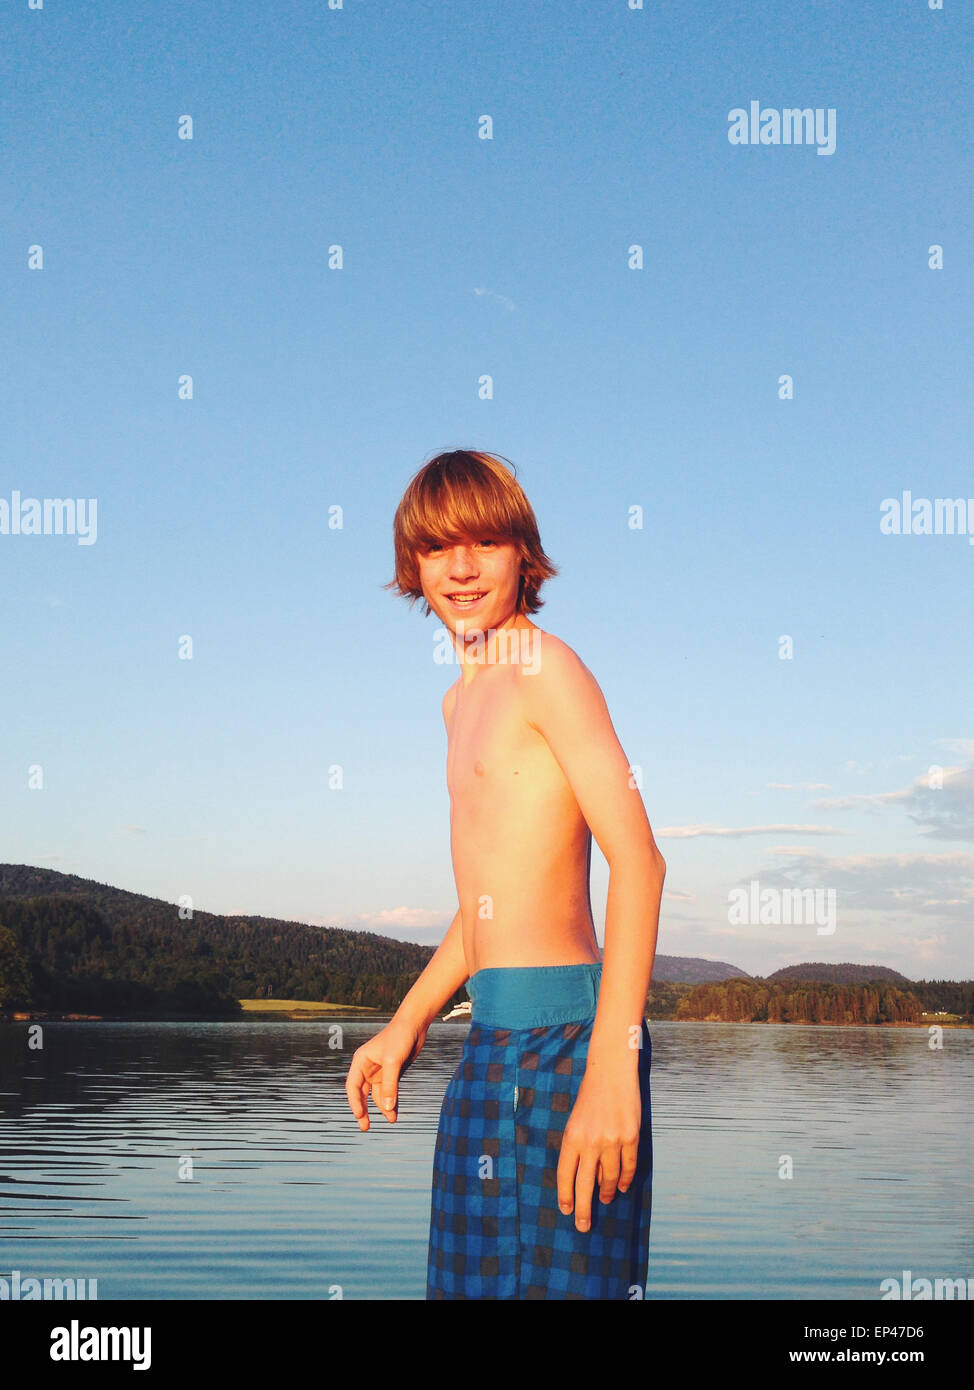 Portrait of a boy standing on a boat ready to go night swimming in mid summer, Norway Stock Photo